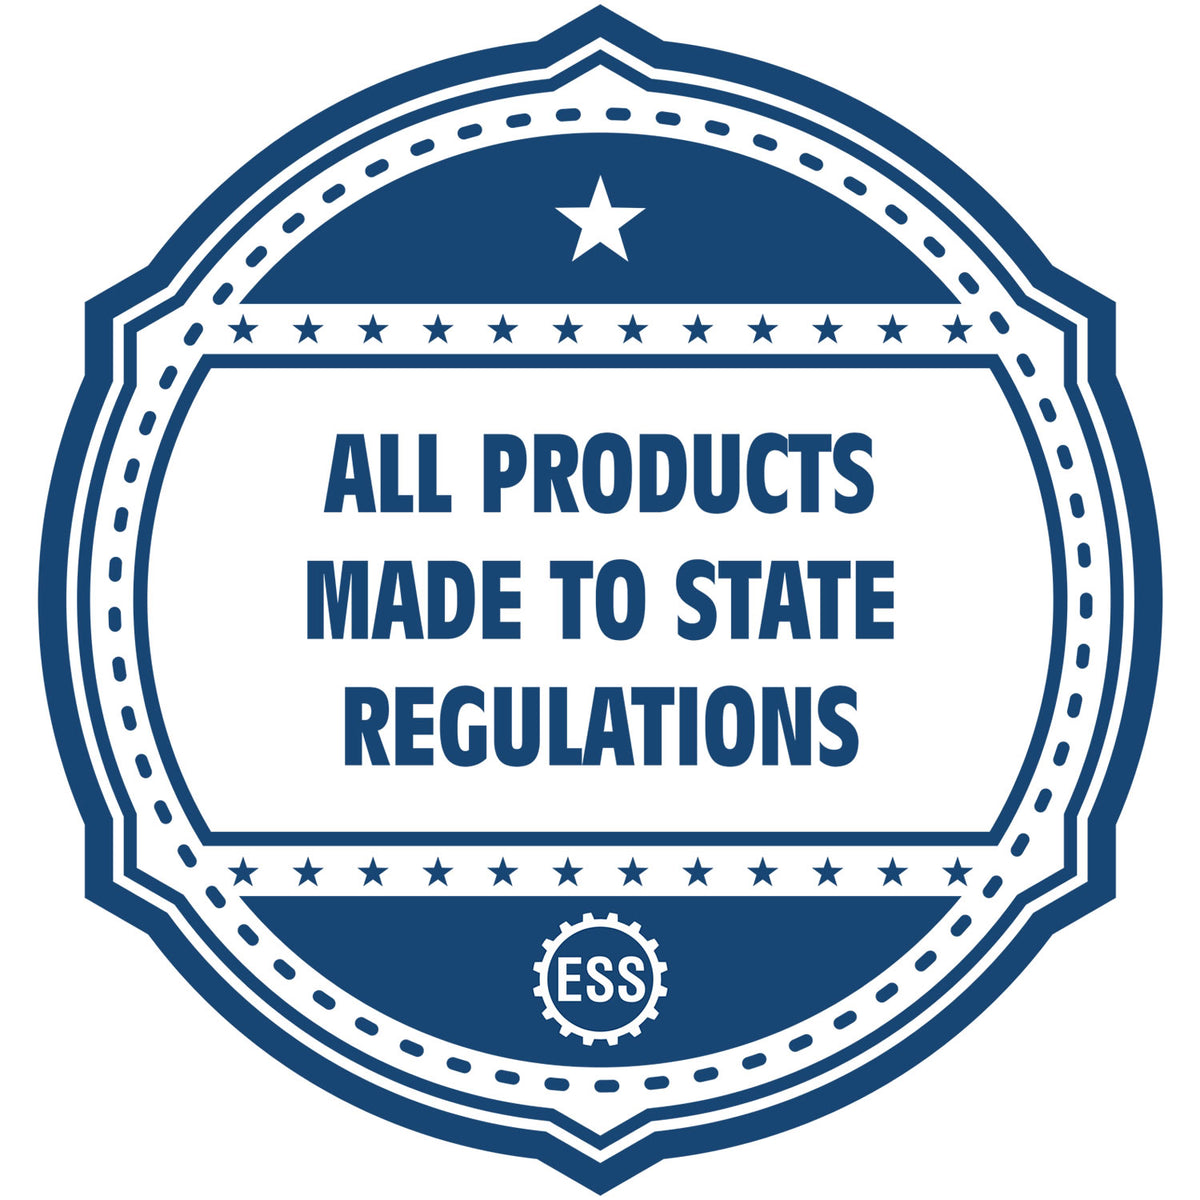 A blue icon or badge for the Hybrid Kentucky Land Surveyor Seal showing that this product is made in compliance with state regulations.